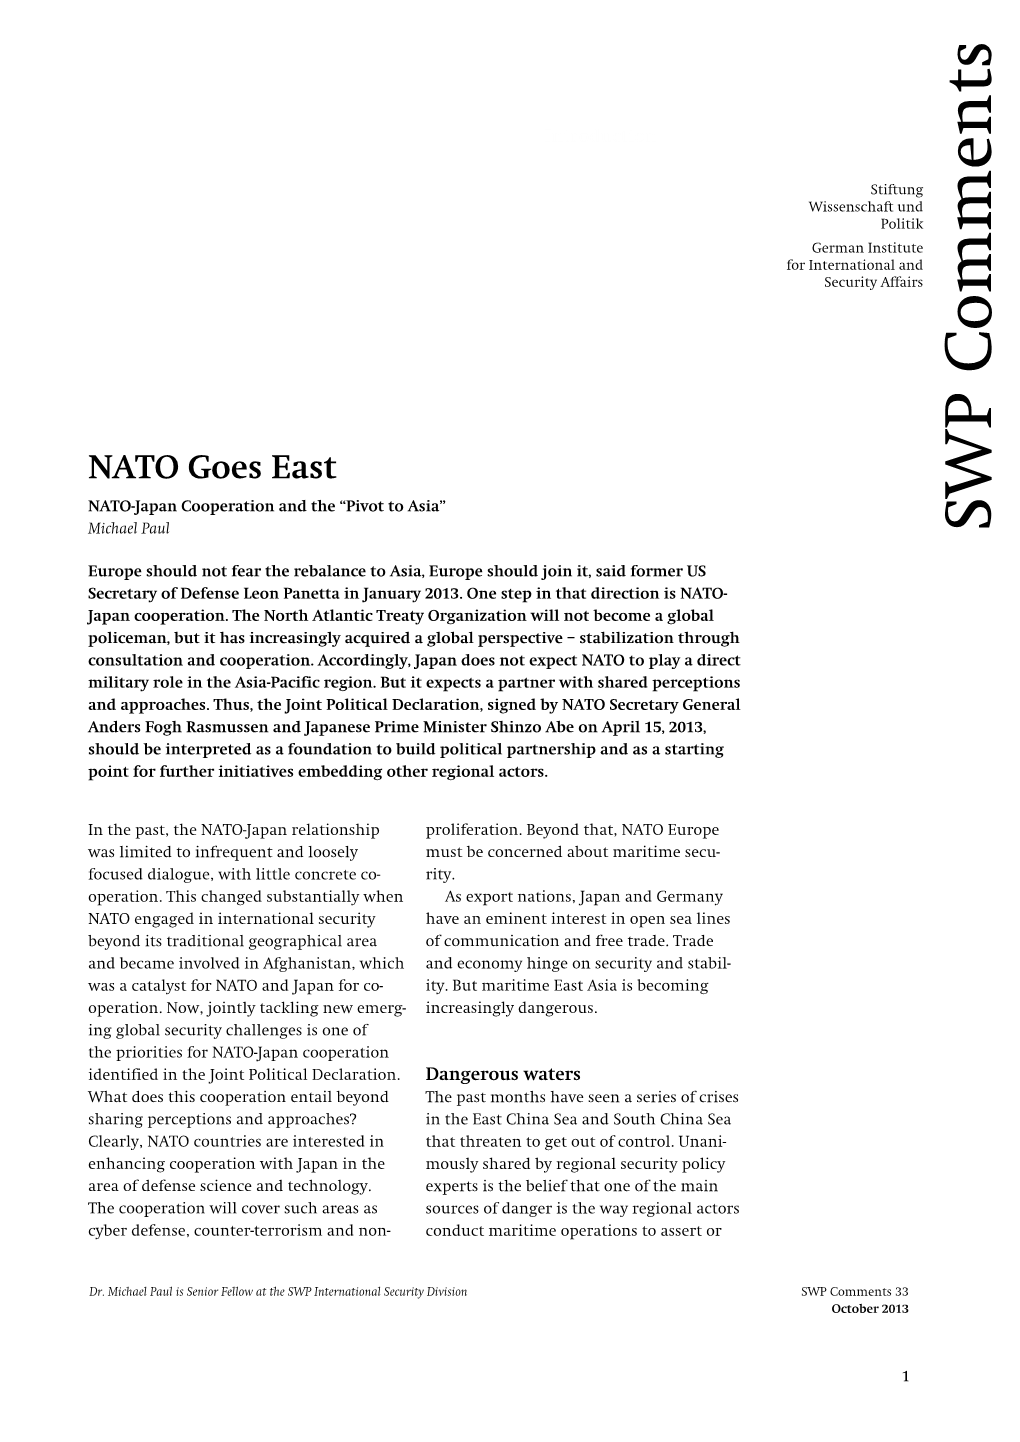 NATO Goes East. NATO-Japan Cooperation and the “Pivot to Asia”